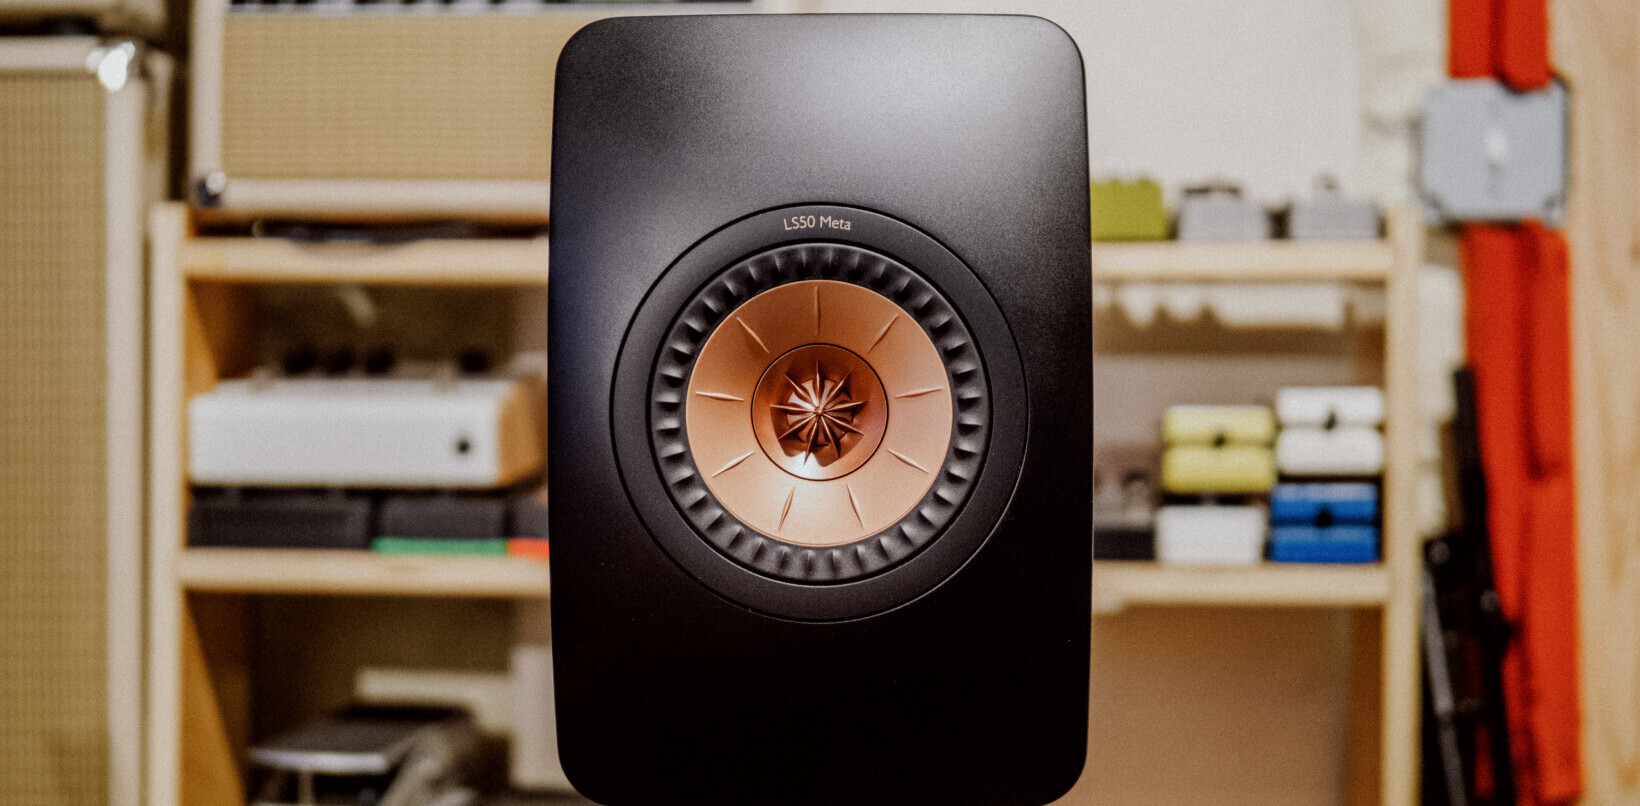 Review: KEF’s LS50 Meta upgrades an audiophile fave to near-perfection